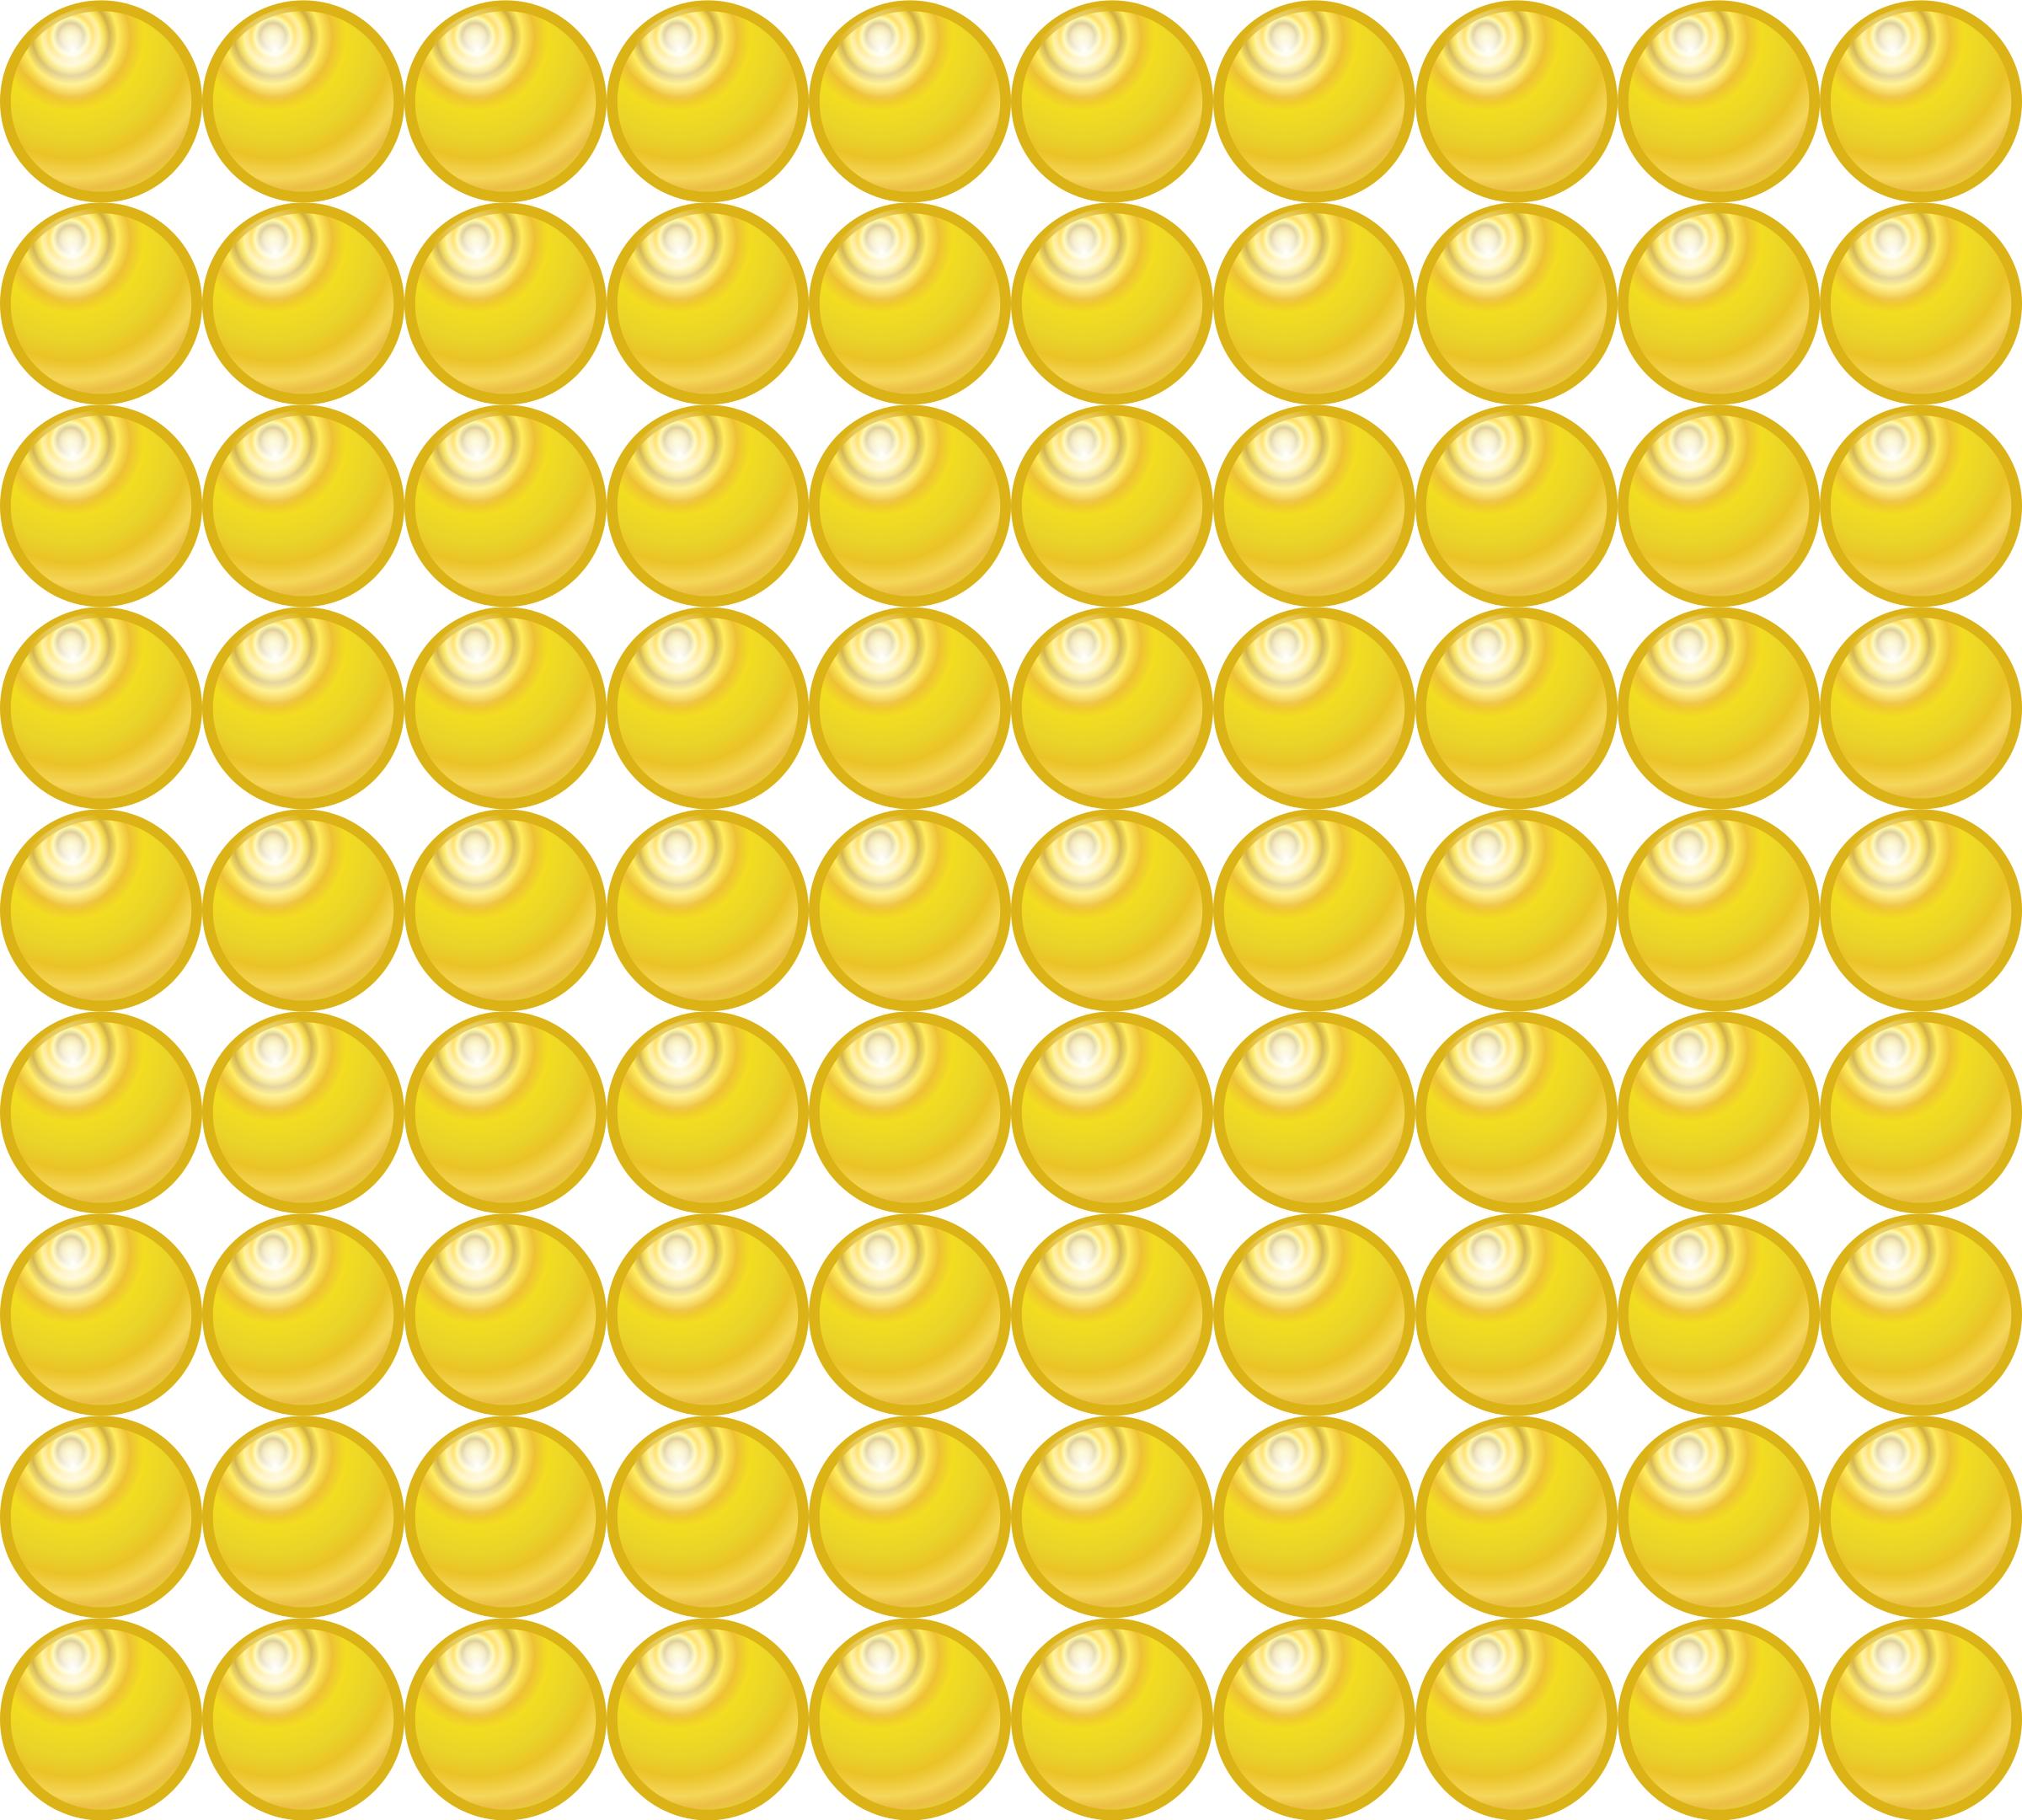 Beads quantitative picture for multiplication 9x10 png